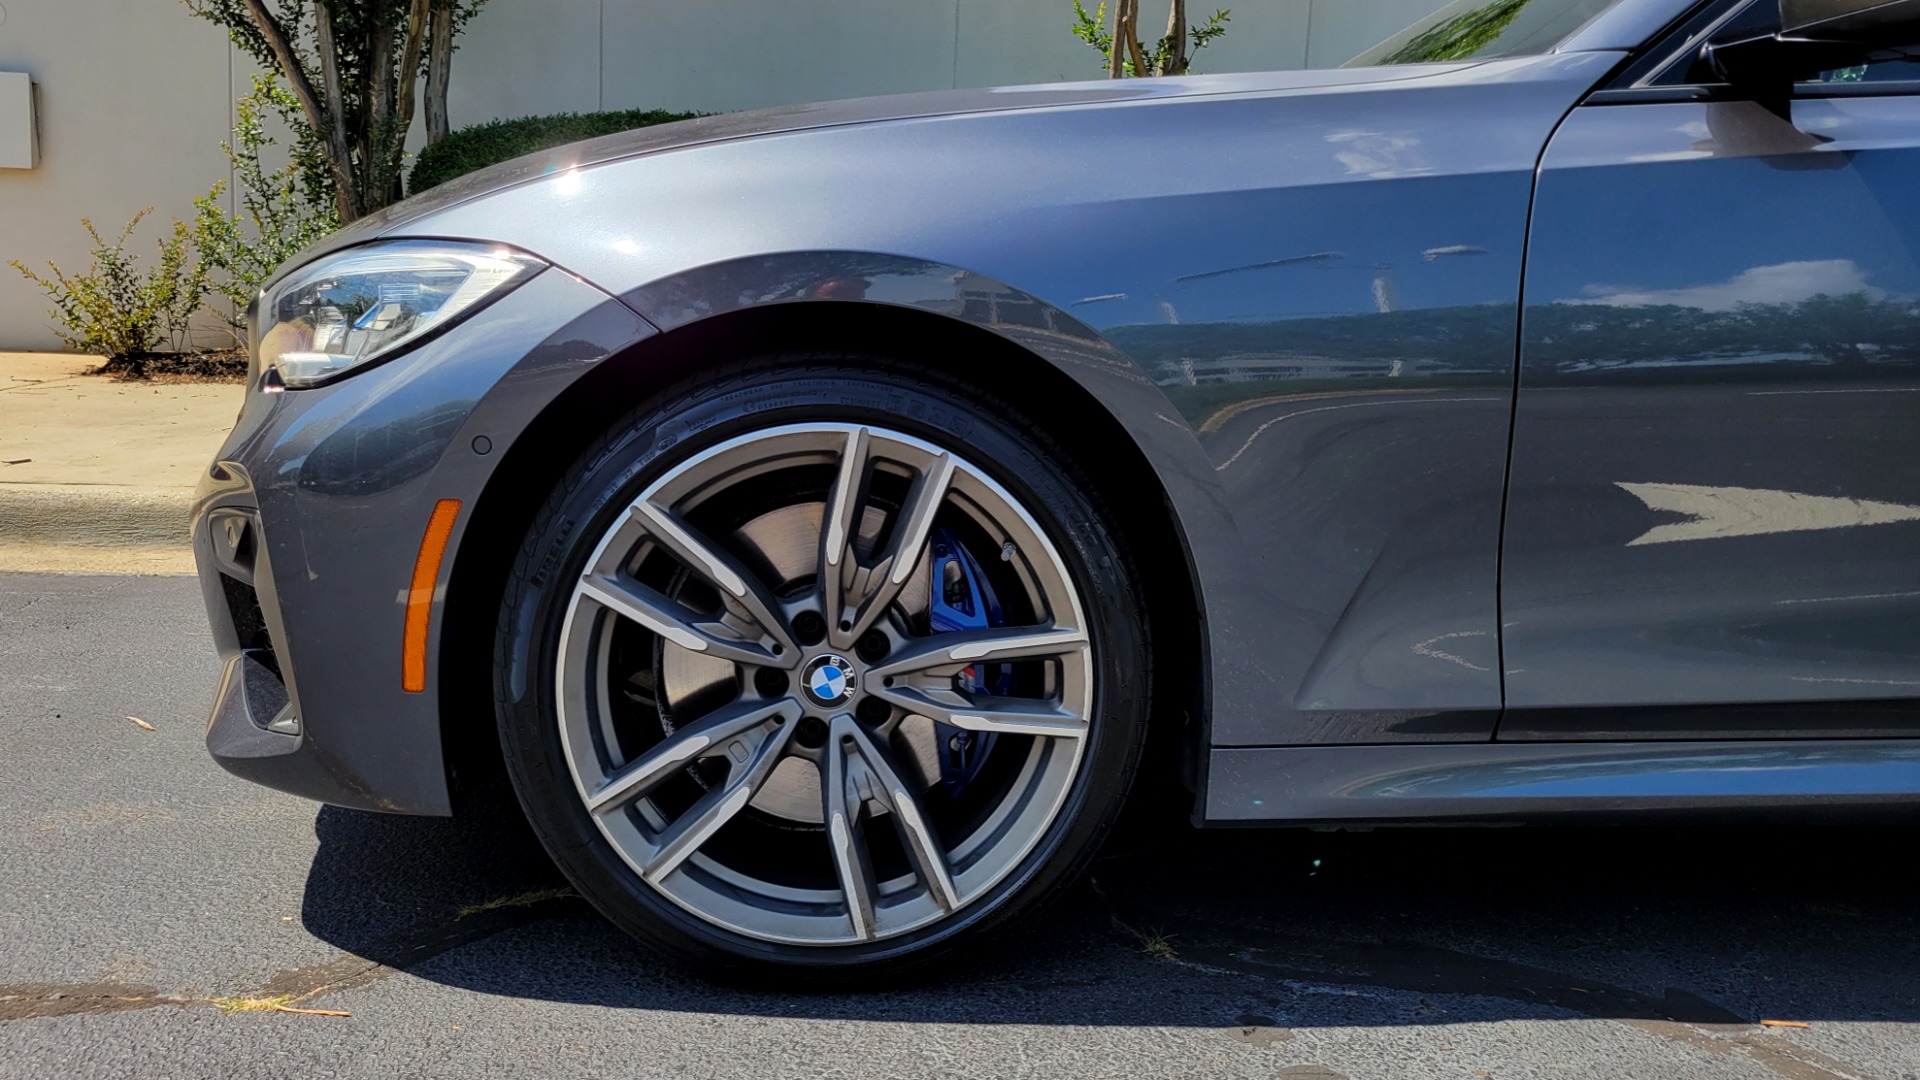 Used 2020 BMW 3 SERIES M340I XDRIVE / PREMIUM / DRVR ASST / H/K SND / REARVIEW for sale $49,595 at Formula Imports in Charlotte NC 28227 85